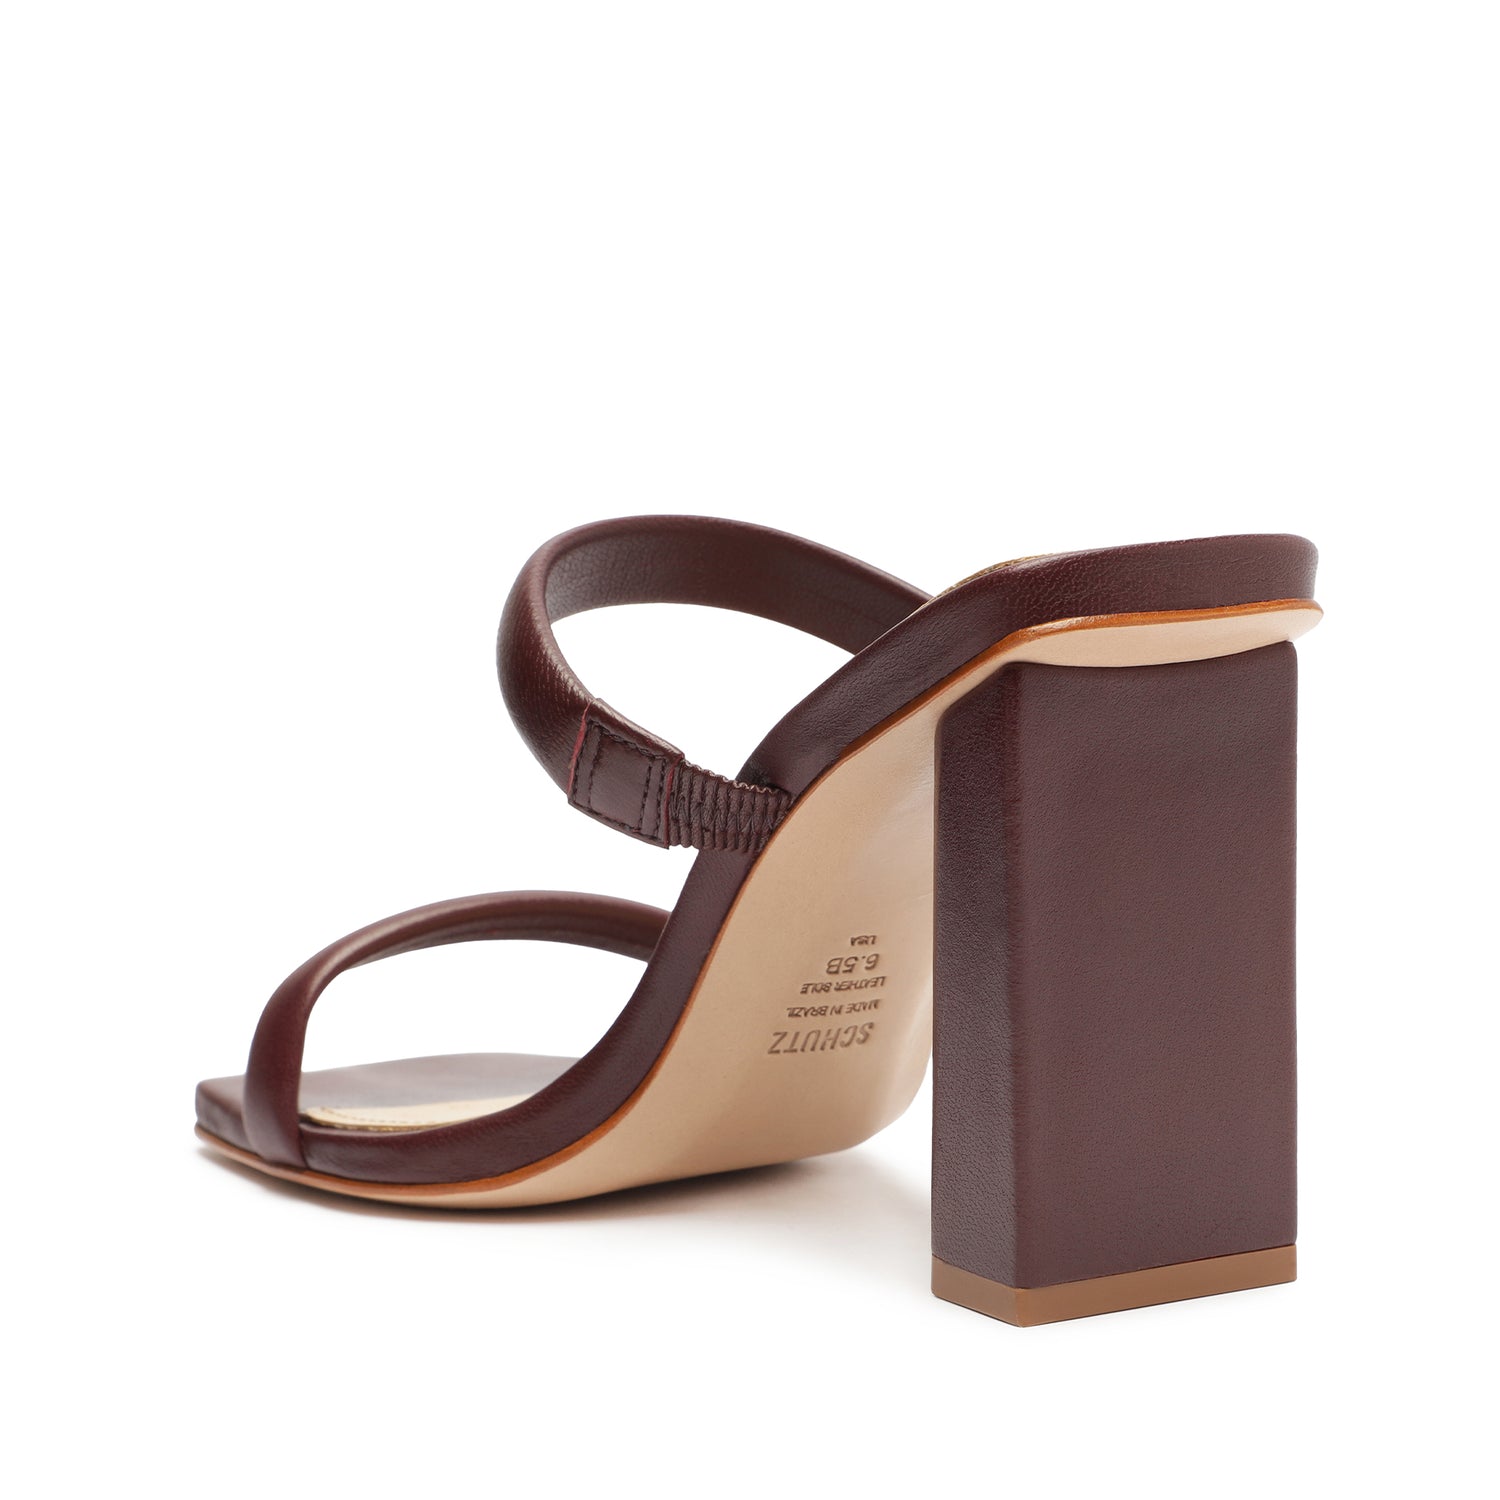 Ully Nappa Leather Sandal Sandals Spring 23    - Schutz Shoes